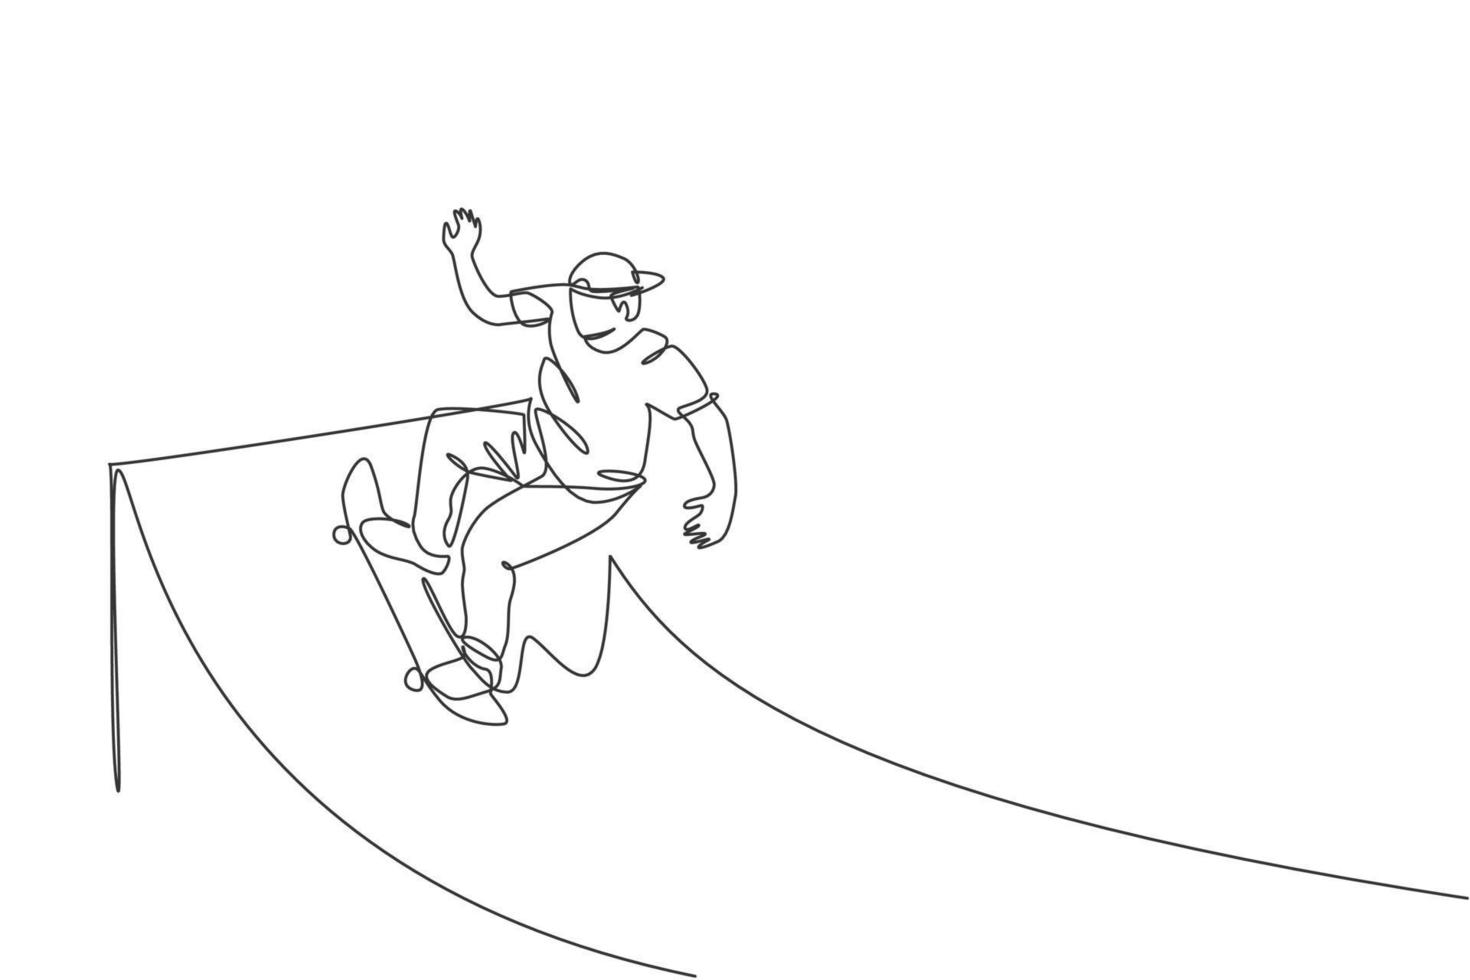 One single line drawing of young skateboarder man exercise riding skateboard at ramp board vector illustration. Teen lifestyle and extreme outdoor sport concept. Modern continuous line draw design